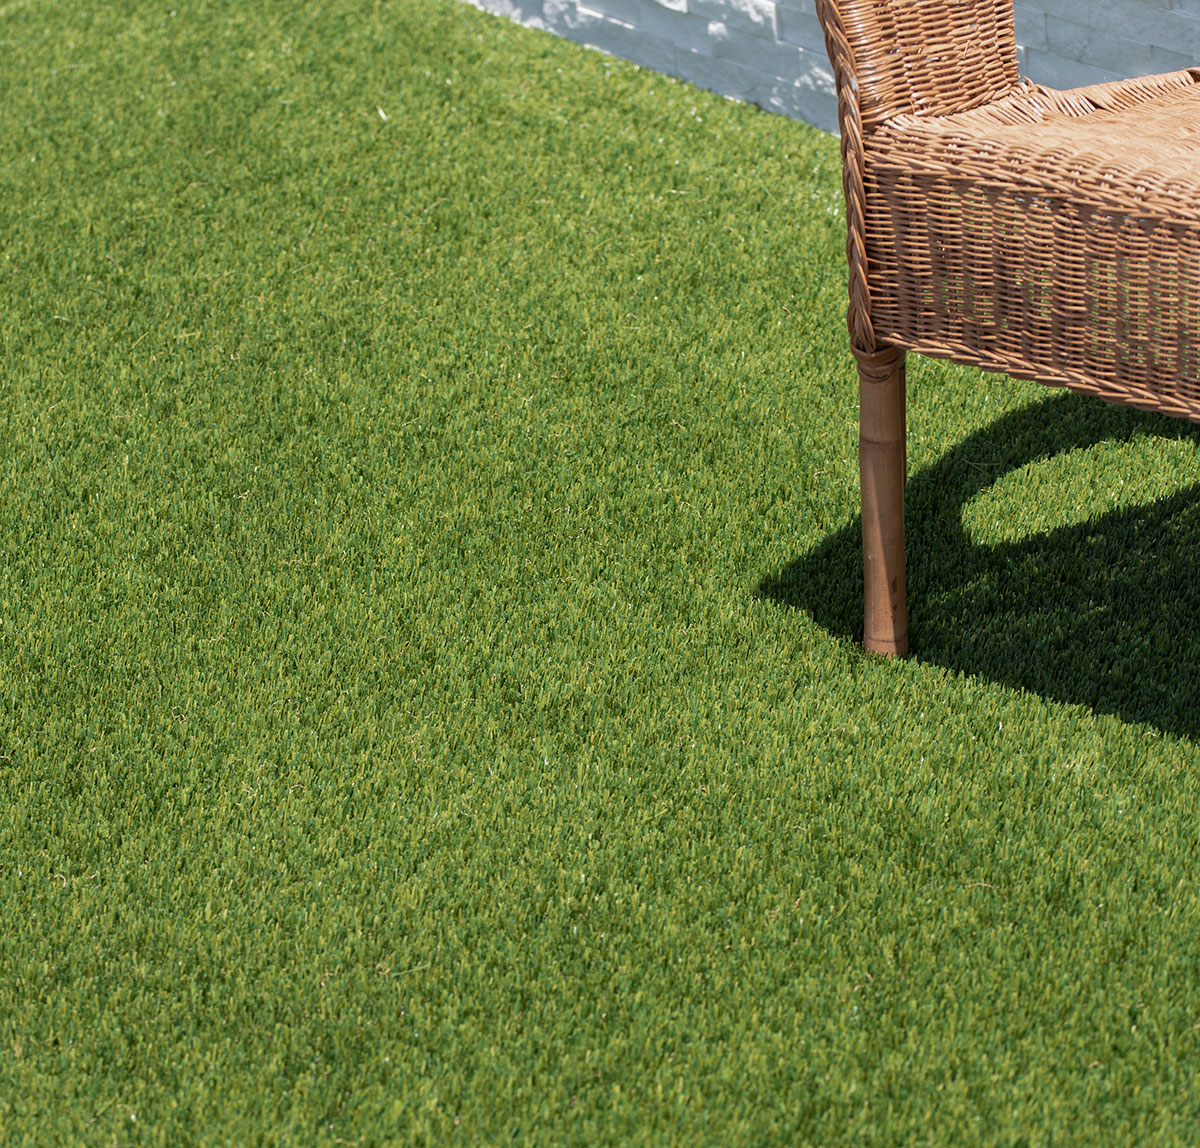 ="Evergrass™ Viridian Turf 91 lawn with outdoor chair